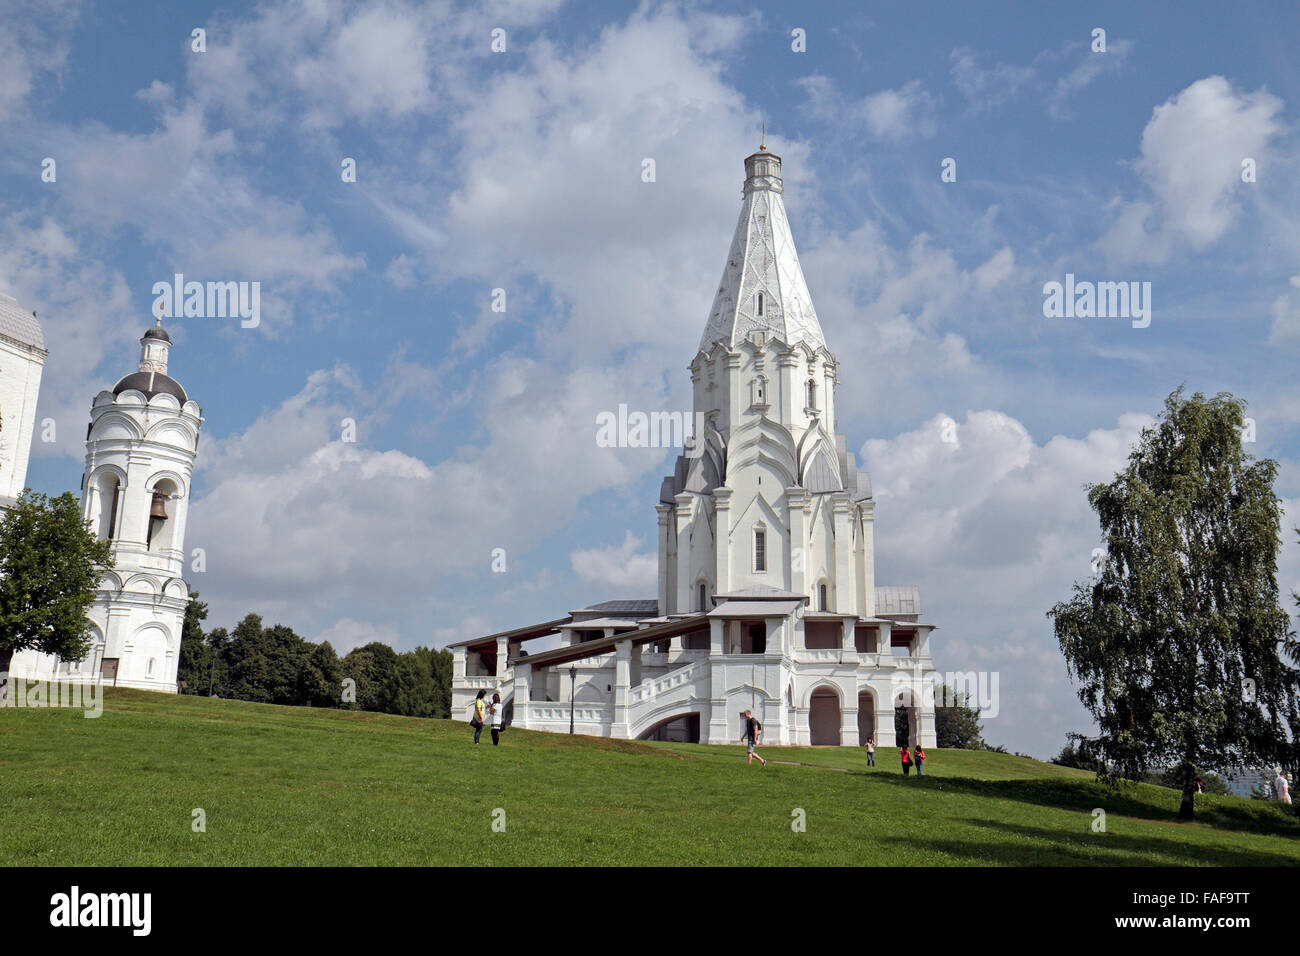 The Church of the Ascension in Kolomenskoye (Kolomenskoye Historical and Architectural Museum and Reserve), Moscow, Russia. Stock Photo